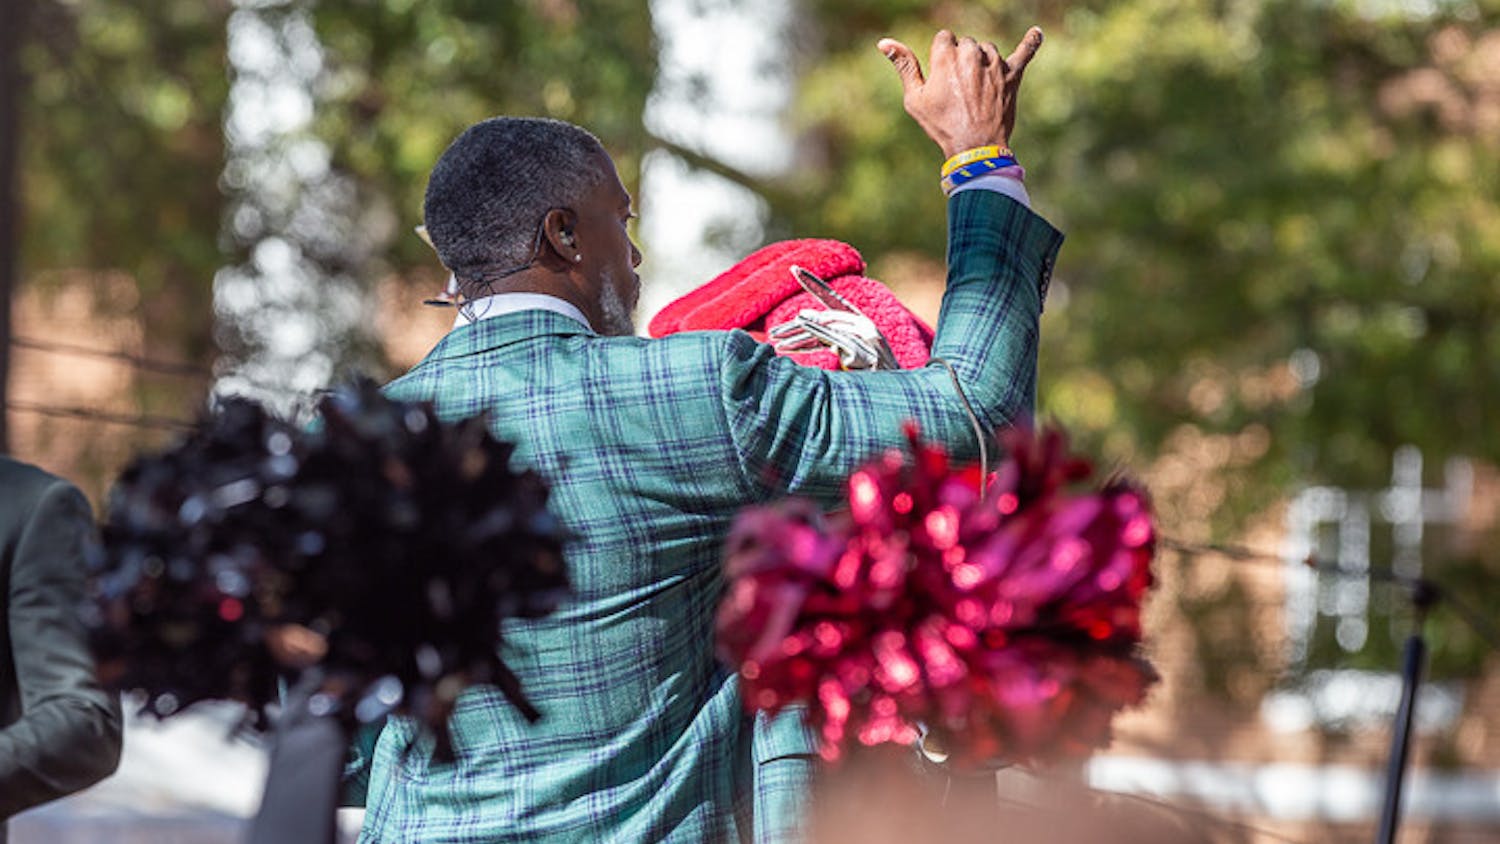 Roman Harper gives a Spurs Up signal at the end of the SEC Nation morning show on Nov. 19, 2022. Harper played safety for Alabama and the New Orleans Saints.